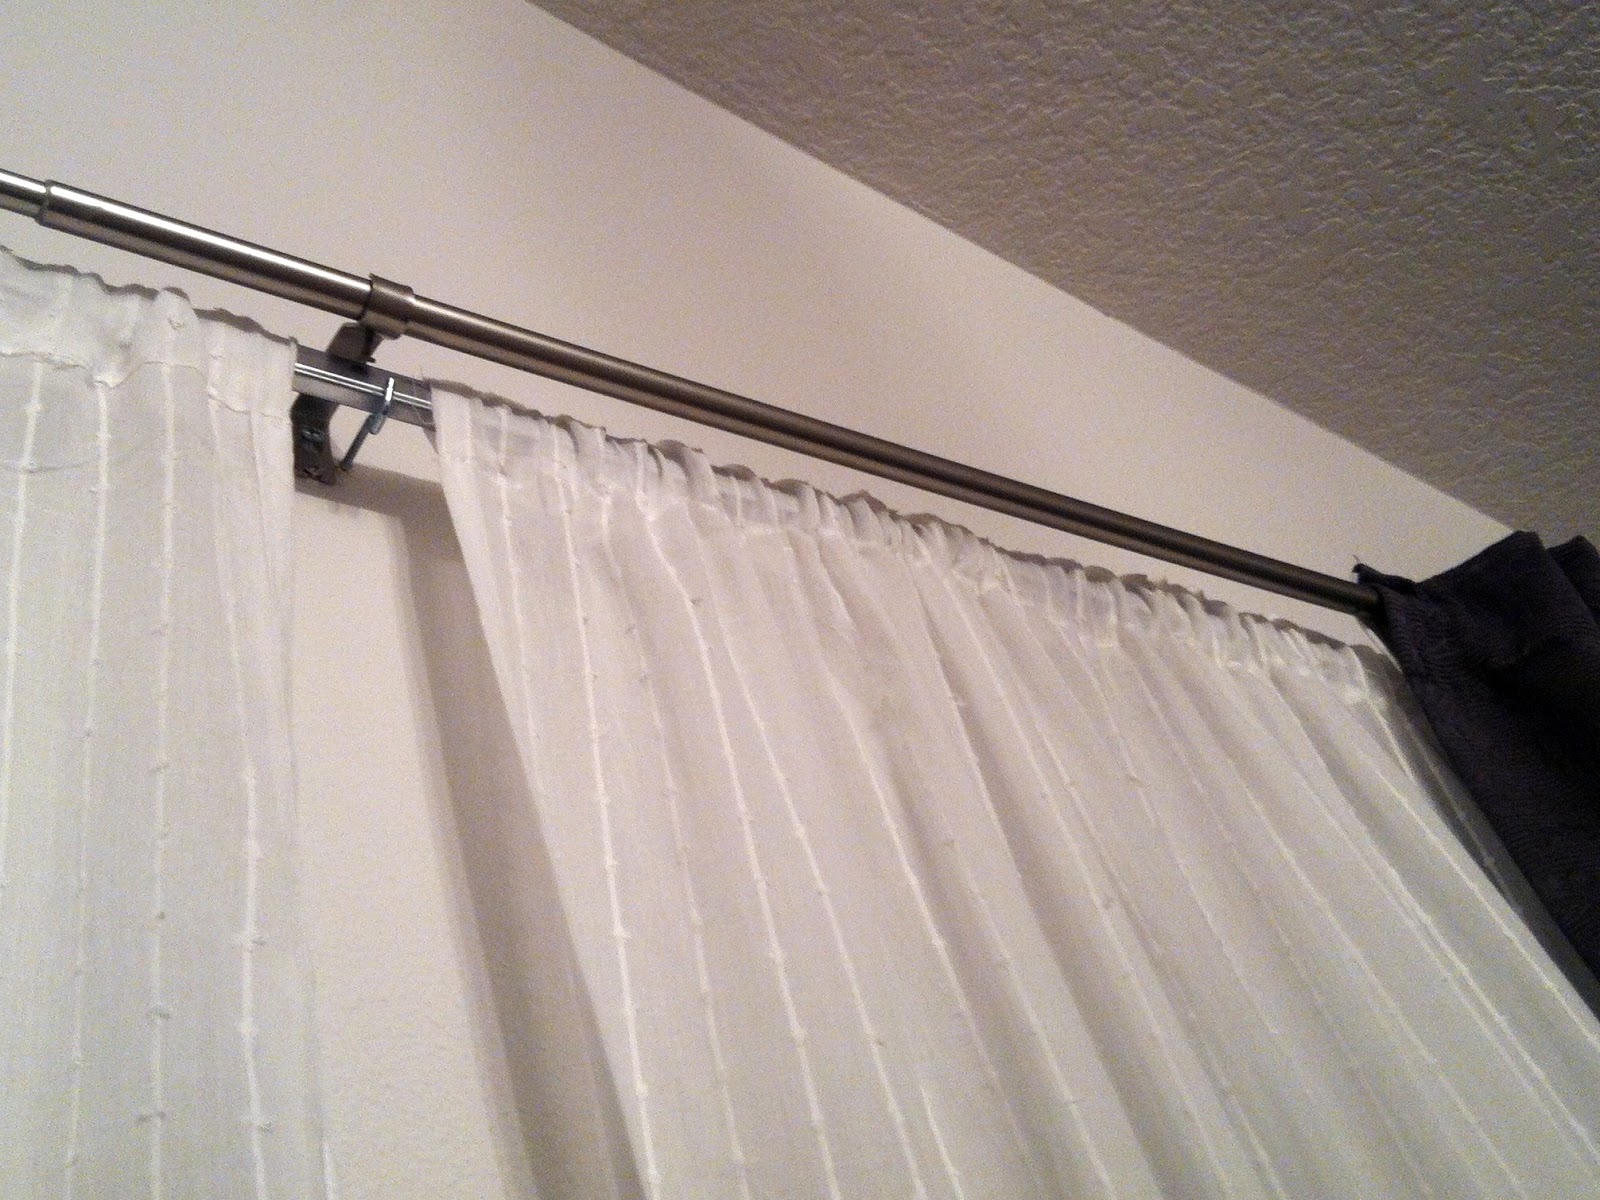 How To Hang Double Curtain Rods Installing Double Curtain Rods